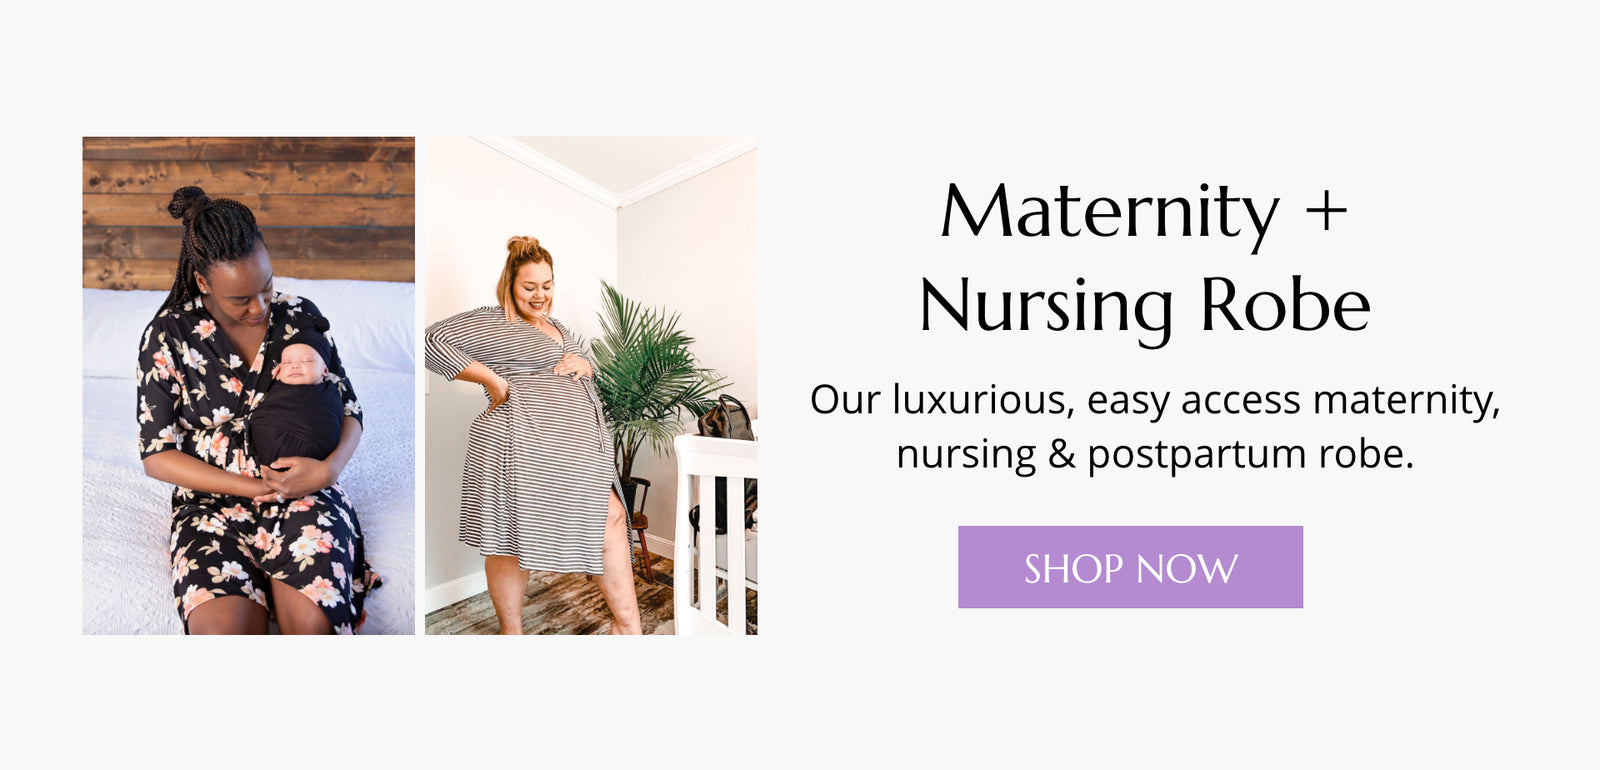 Xmarks Delivery/Labor/Nursing Nightgown Women's Maternity Hospital  Gown/Sleepwear for Breastfeeding, Pink, US 12